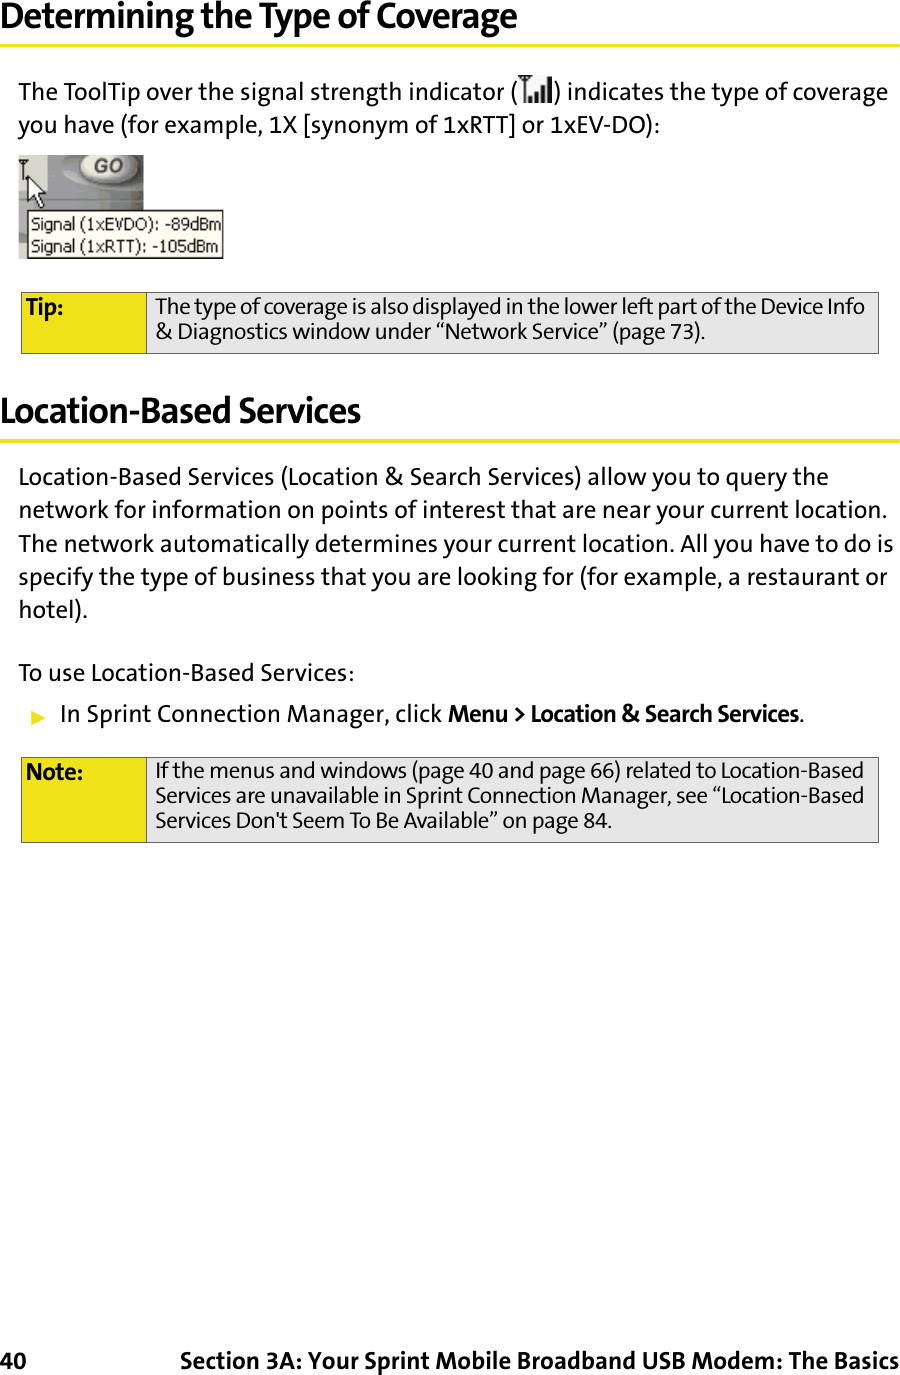 40 Section 3A: Your Sprint Mobile Broadband USB Modem: The BasicsDetermining the Type of CoverageThe ToolTip over the signal strength indicator ( ) indicates the type of coverage you have (for example, 1X [synonym of 1xRTT] or 1xEV-DO):Location-Based ServicesLocation-Based Services (Location &amp; Search Services) allow you to query the network for information on points of interest that are near your current location. The network automatically determines your current location. All you have to do is specify the type of business that you are looking for (for example, a restaurant or hotel).To use Location-Based Services:䊳In Sprint Connection Manager, click Menu &gt; Location &amp; Search Services.Tip: The type of coverage is also displayed in the lower left part of the Device Info &amp; Diagnostics window under “Network Service” (page 73).Note: If the menus and windows (page 40 and page 66) related to Location-Based Services are unavailable in Sprint Connection Manager, see “Location-Based Services Don&apos;t Seem To Be Available” on page 84.